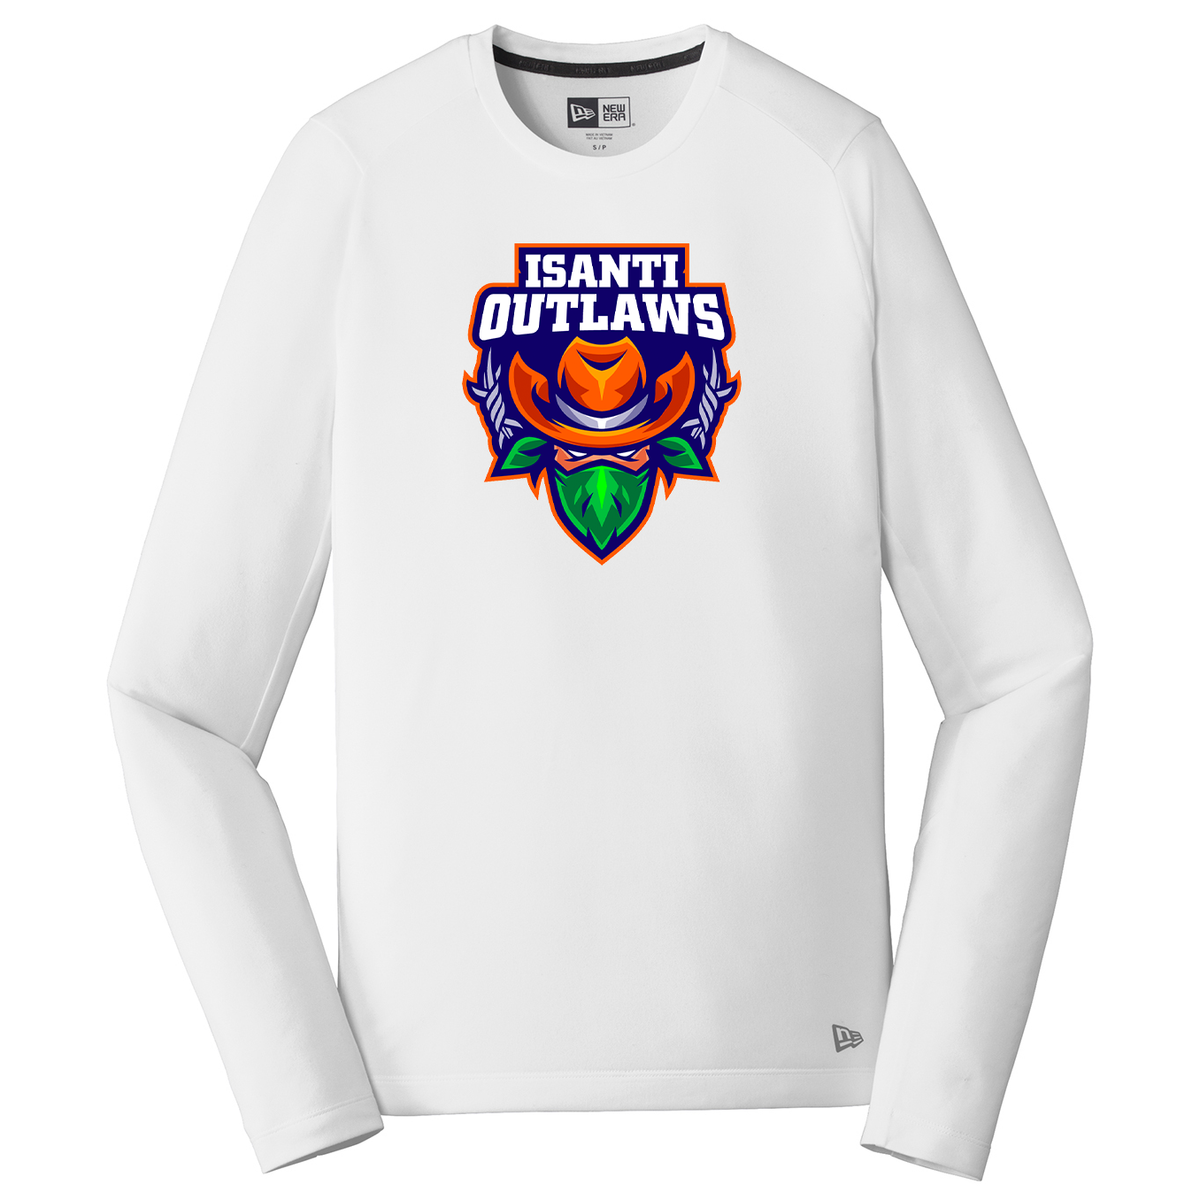 Isanti Outlaws Performance Long Sleeve Crew